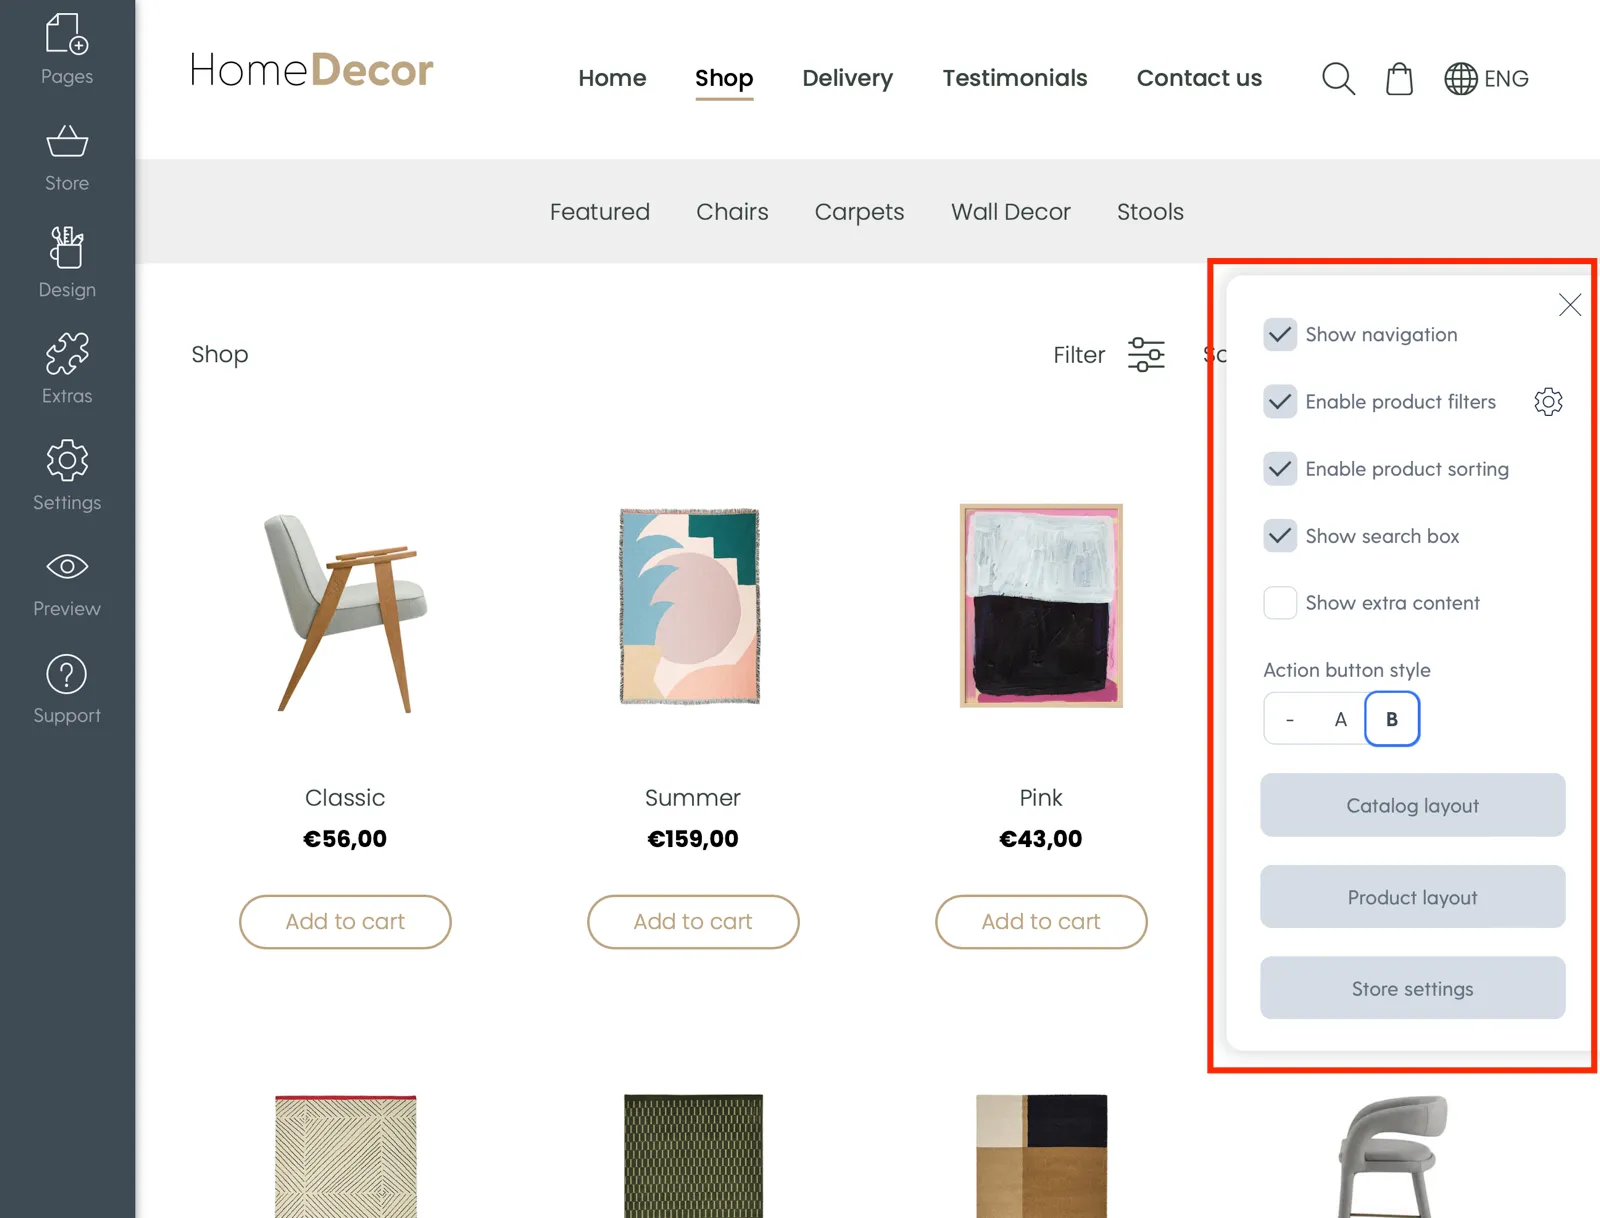 Editing the layout of your online store